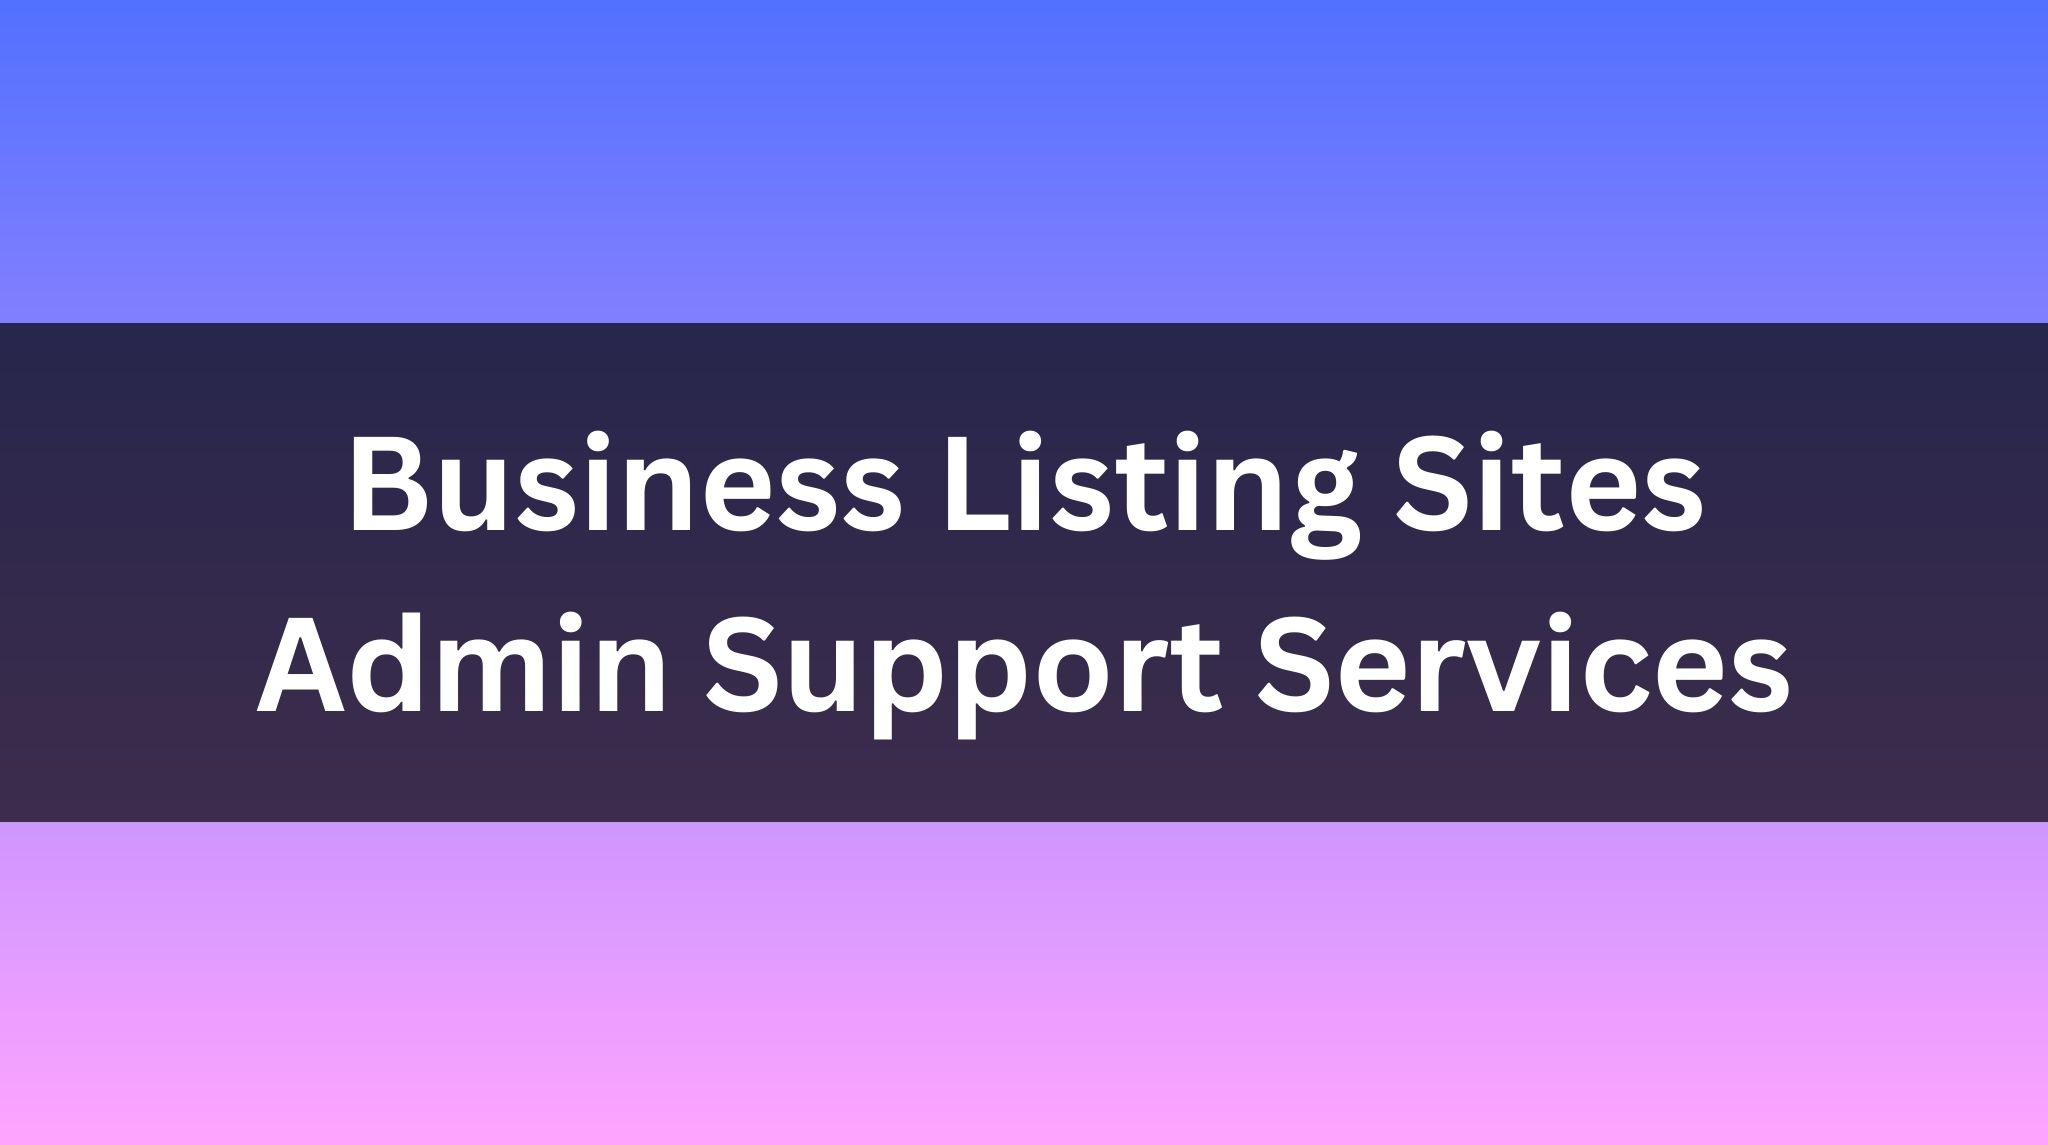 Free Business Listing Sites for Admin Support Services